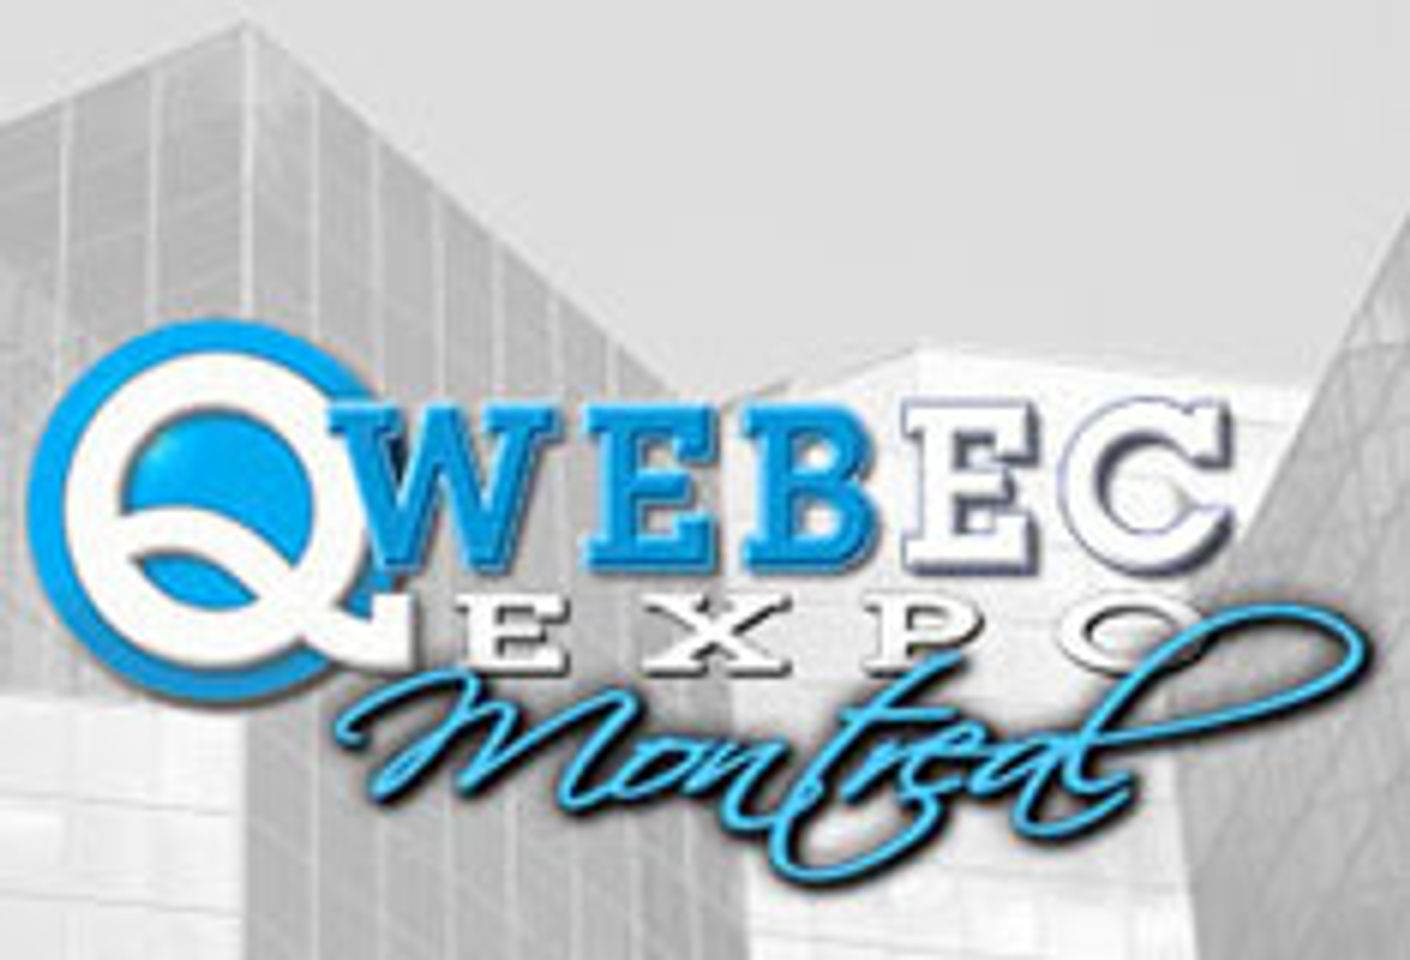 Qwebec Expo Extends Early Birds Registration Special Discount